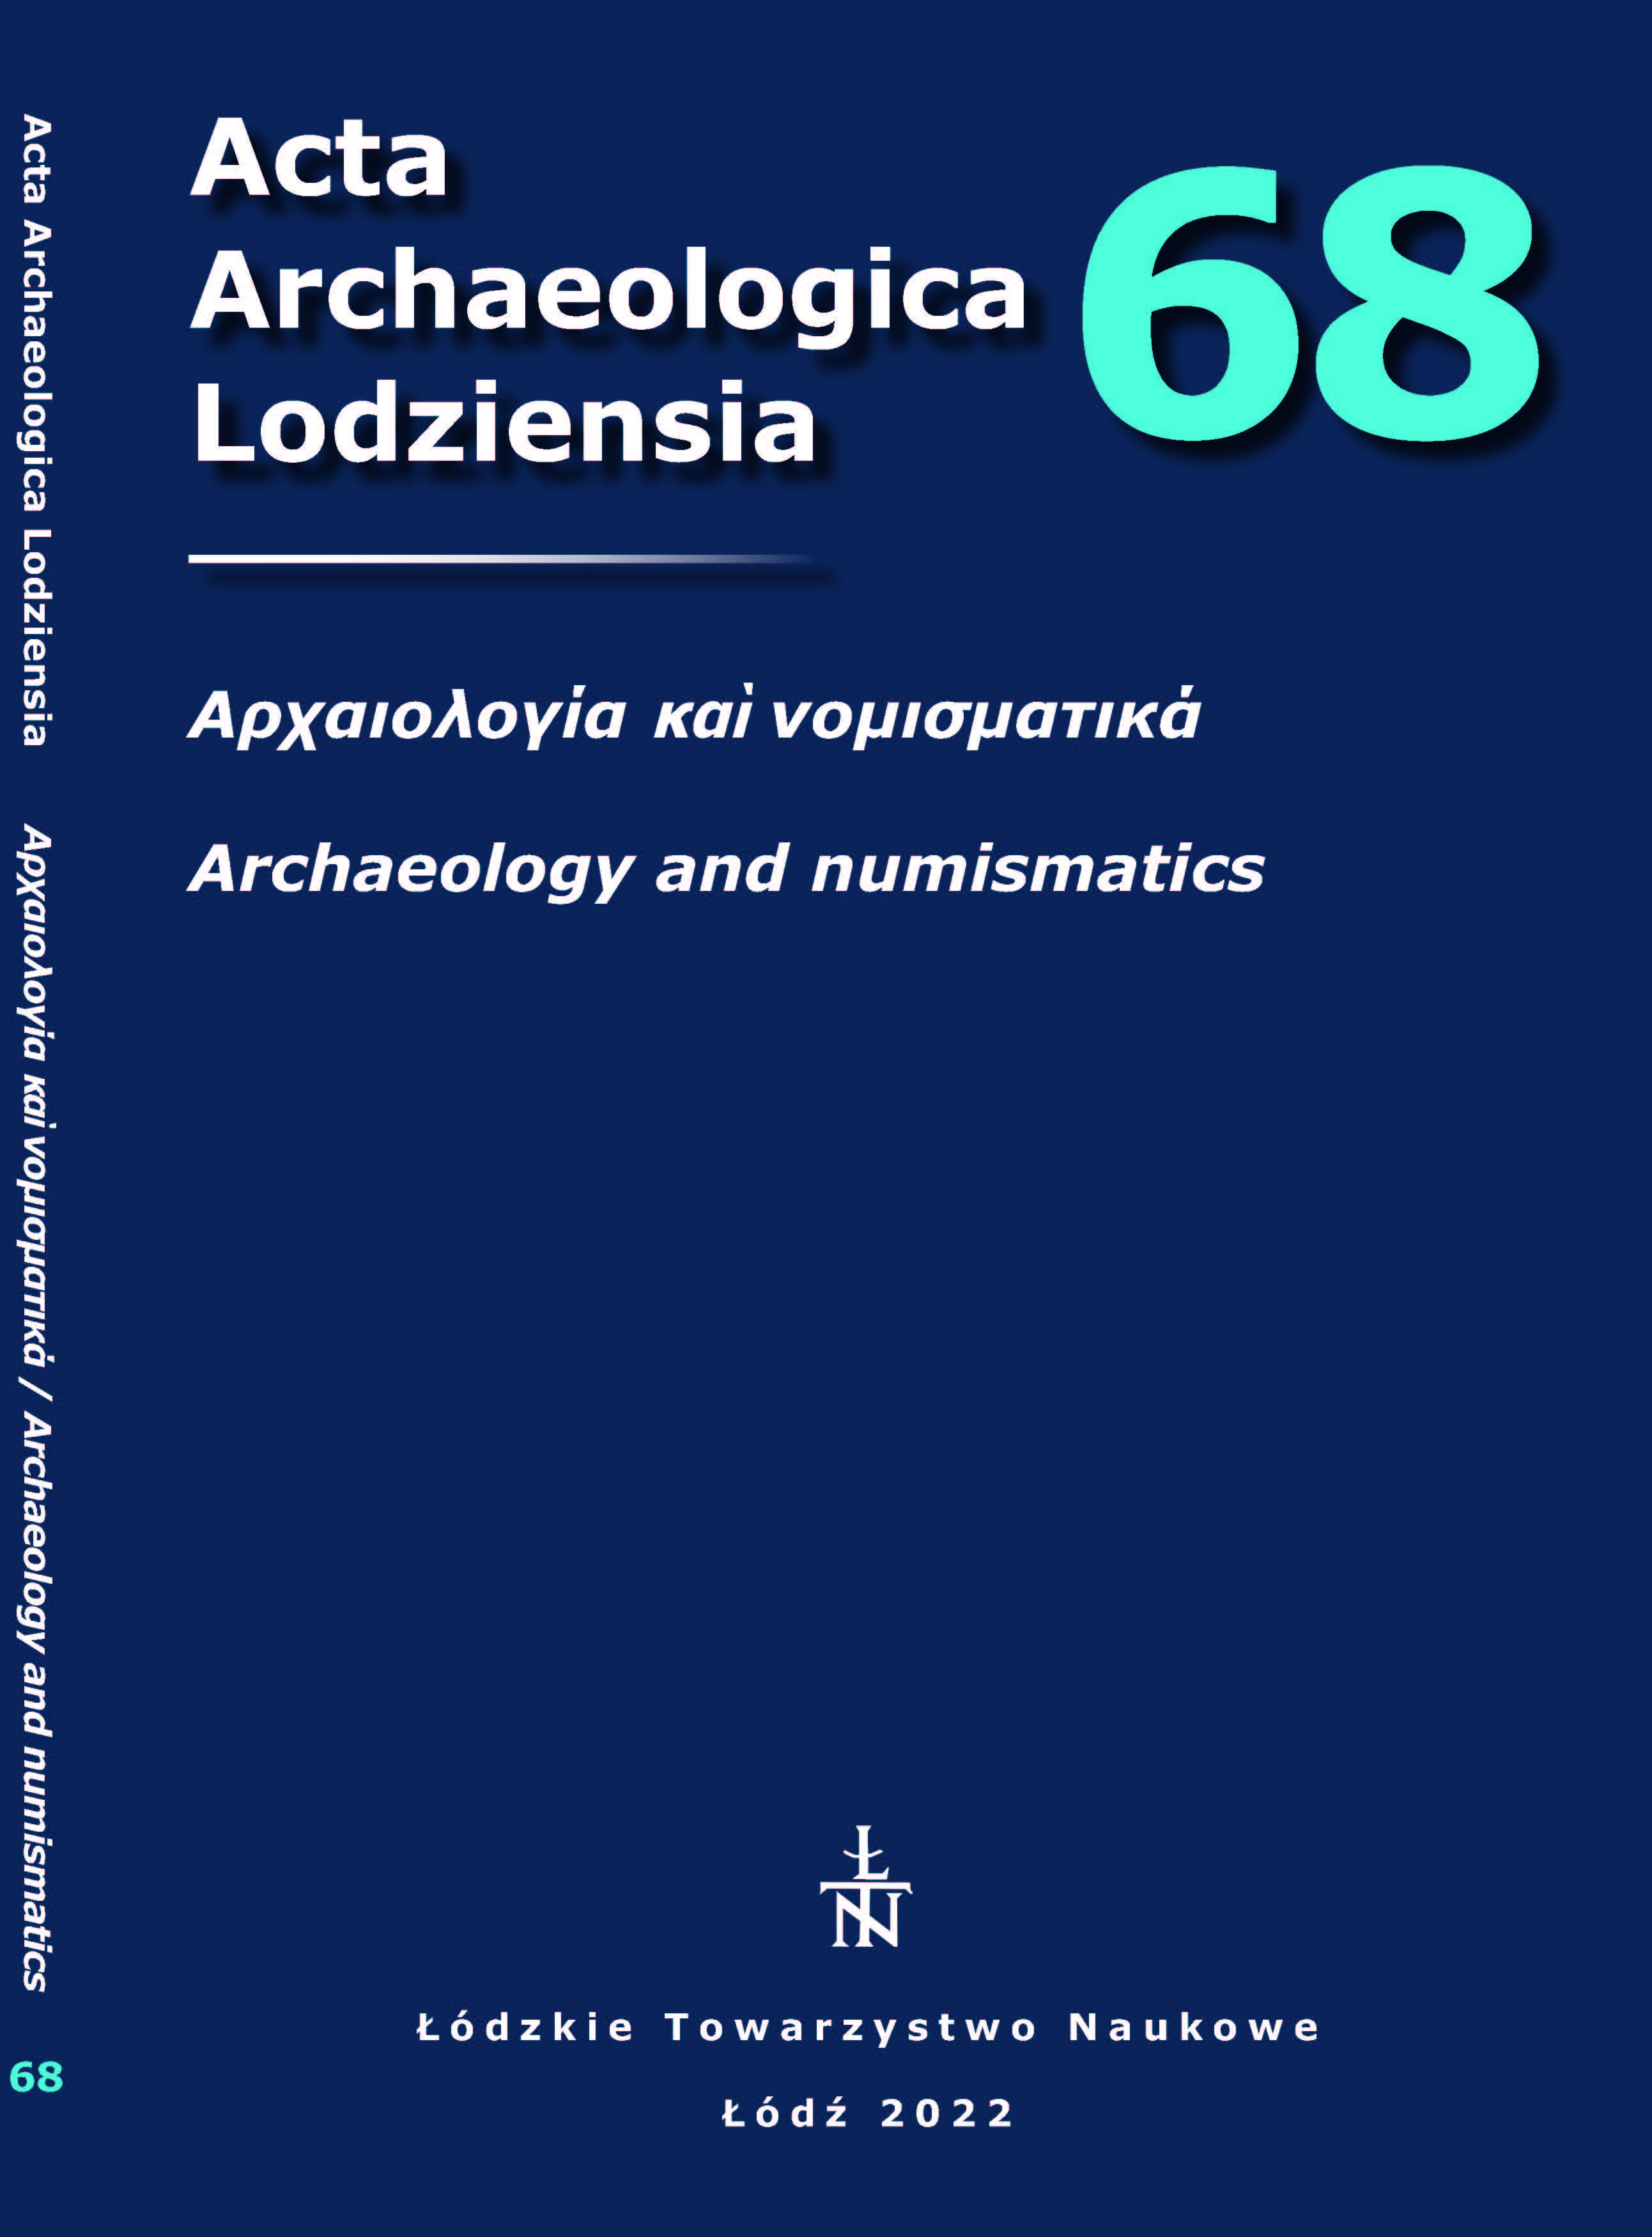 The palaeoenvironmental changes in the era of Greek colonization of the northern Black Sea coast and the development of Greek settlements of the lower Dniester microregion. Preliminary research